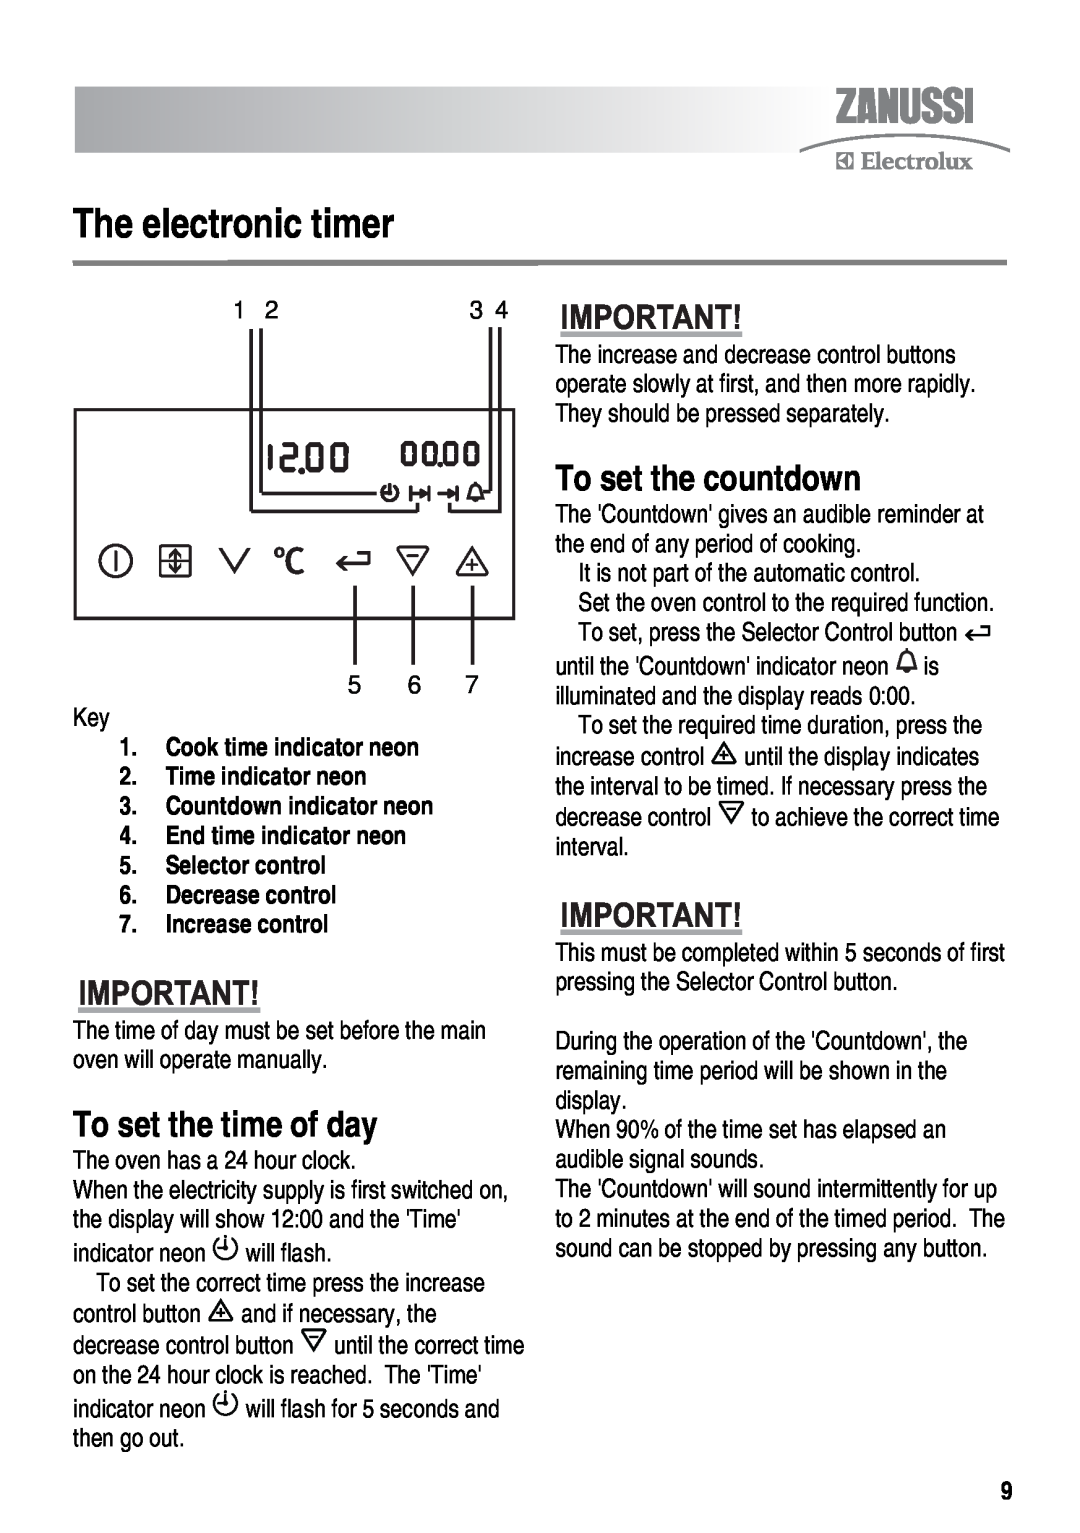 Zanussi ZKT6050 user manual The electronic timer, To set the time of day, To set the countdown, 1 23 4 IMPORTANT 